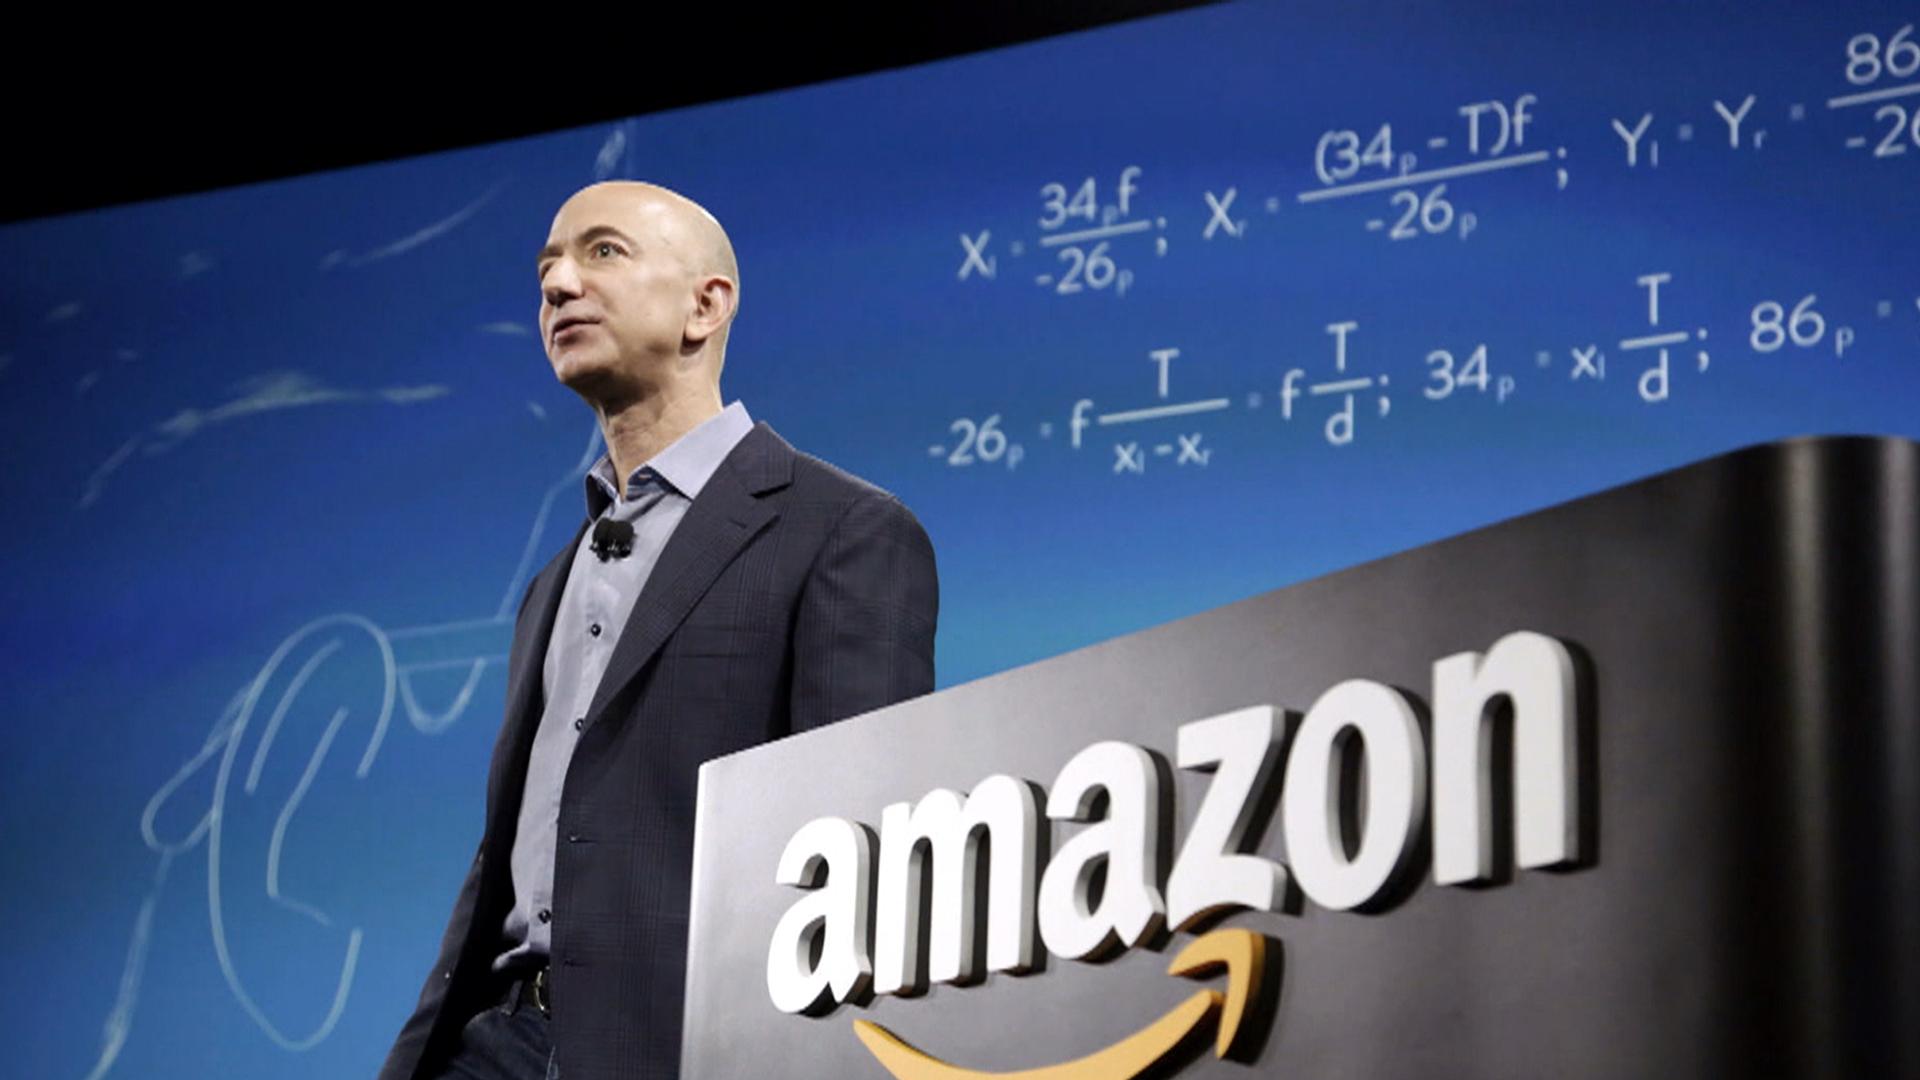 Amazon CEO Jeff Bezos fires back at NY Times over critique